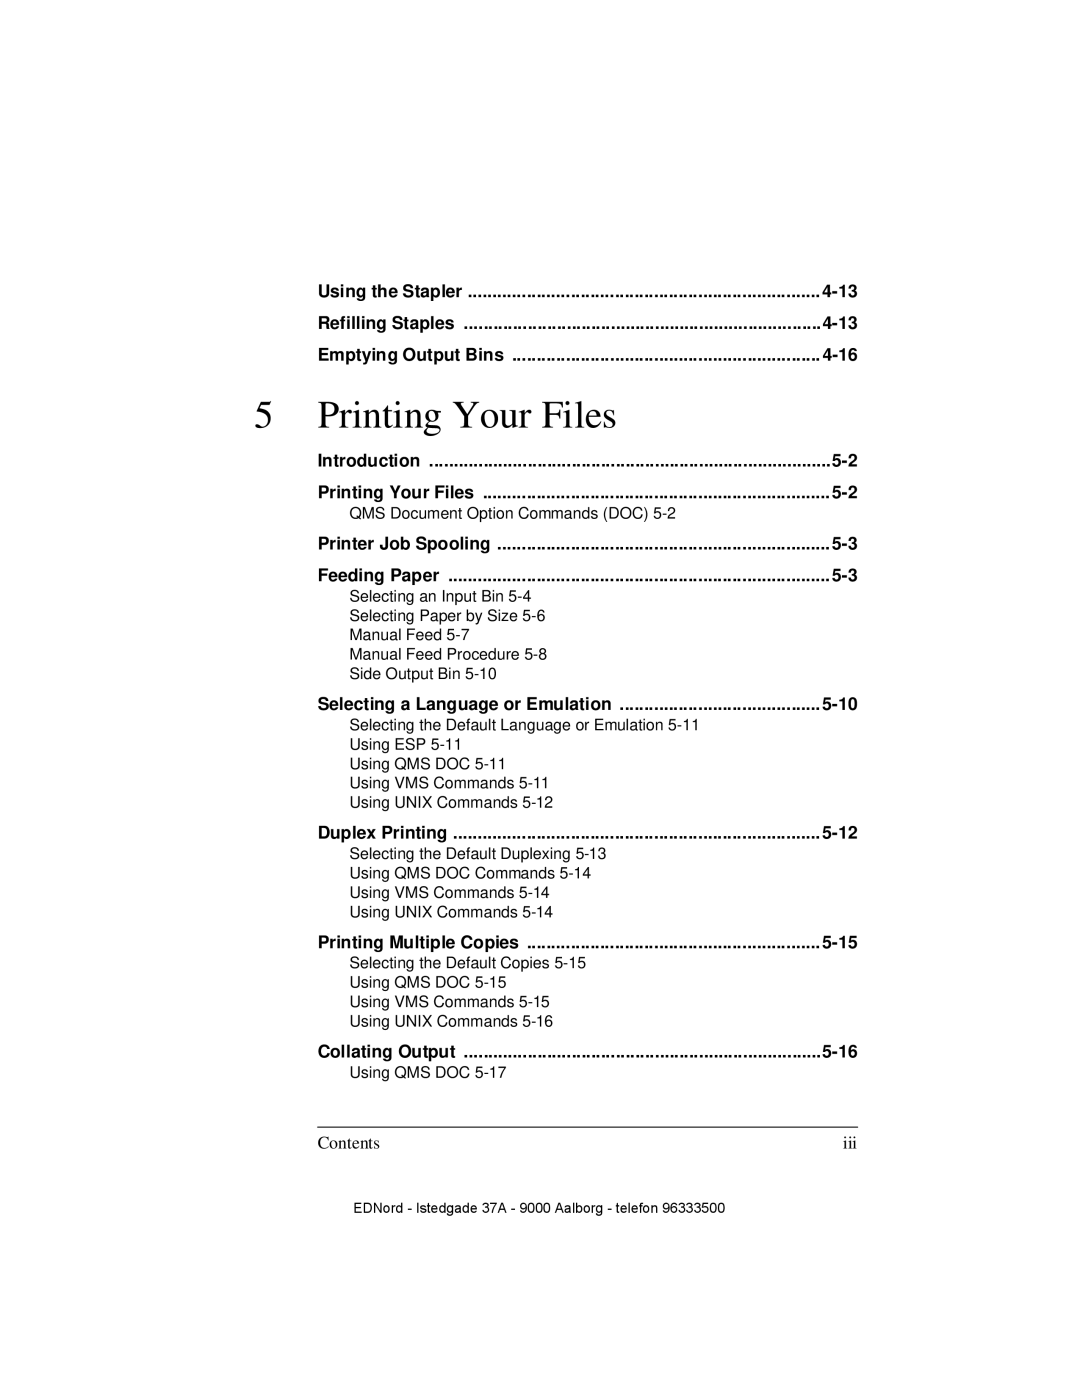 IBM QMS 4525 manual Printing Your Files, Contents 